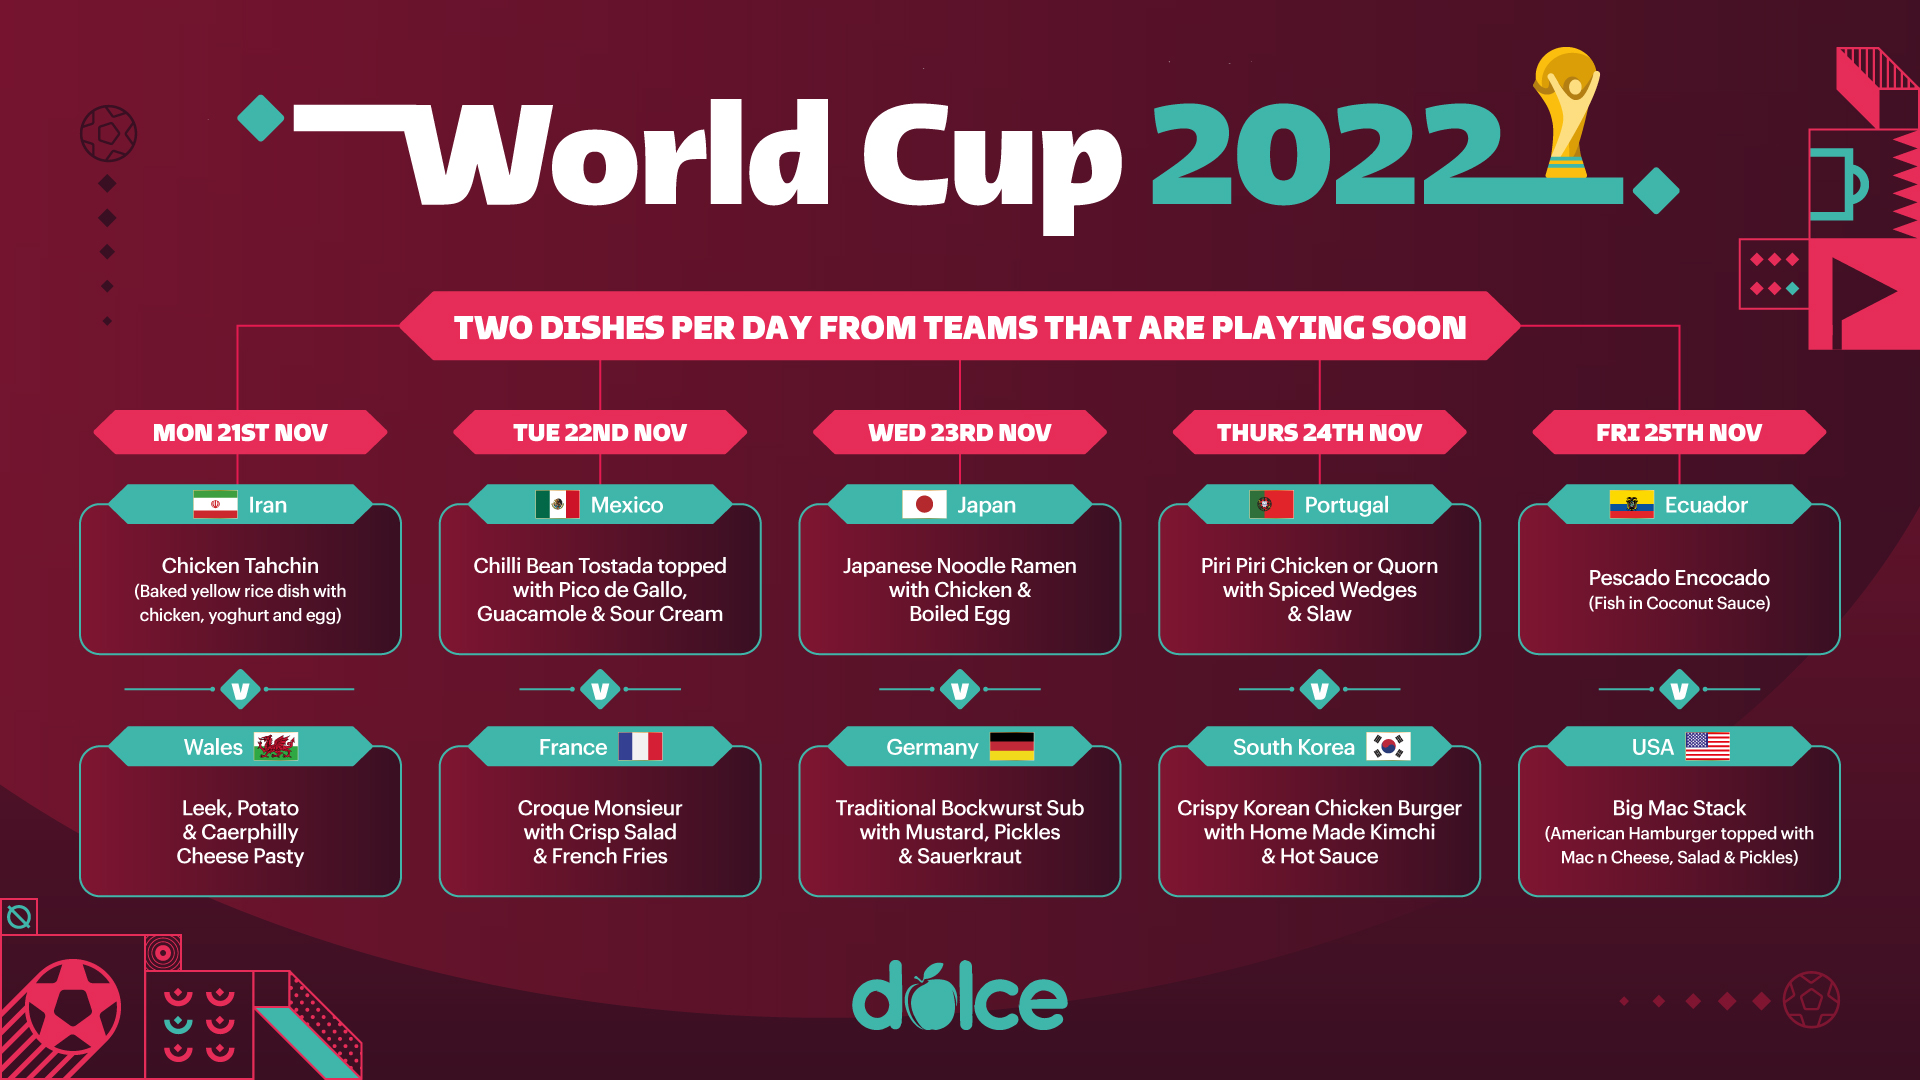 Image of the World Cup menu